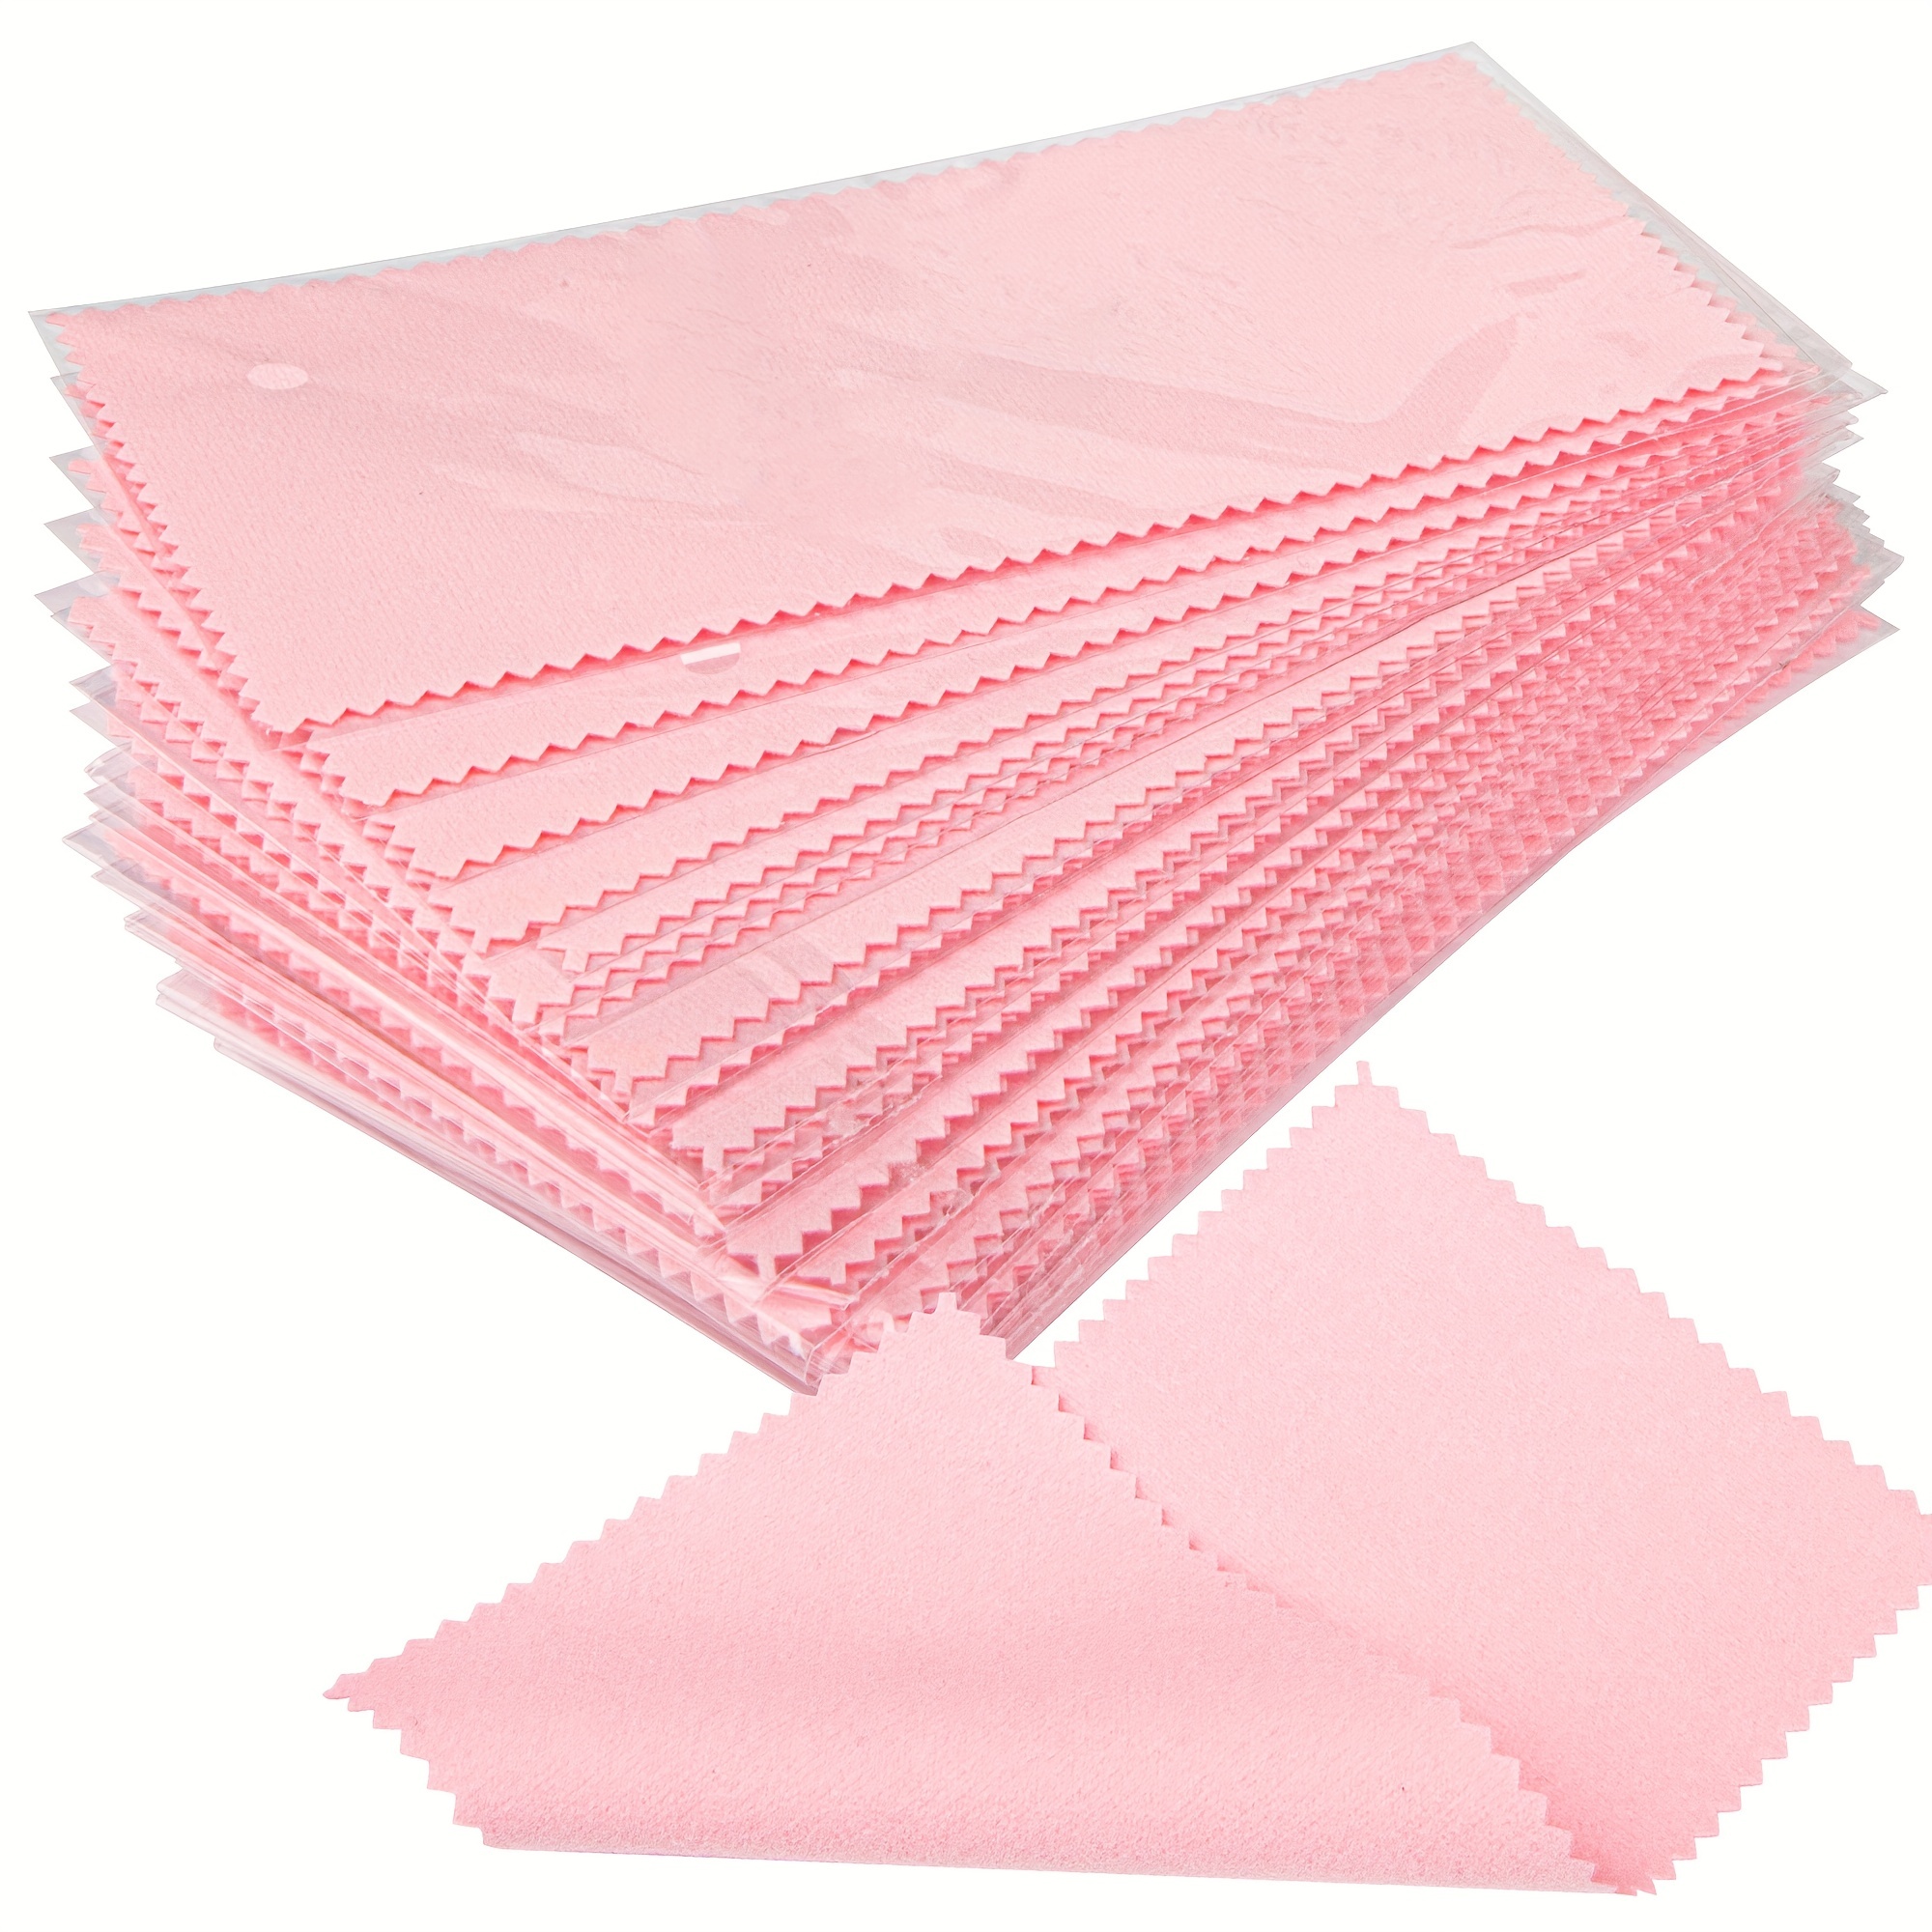 50pcs Jewelry Cleaning Cloth Pink Polishing Cloth For Sterling Silver Gold  Platinum - Small Polish Cloth 3.15x3.15inch